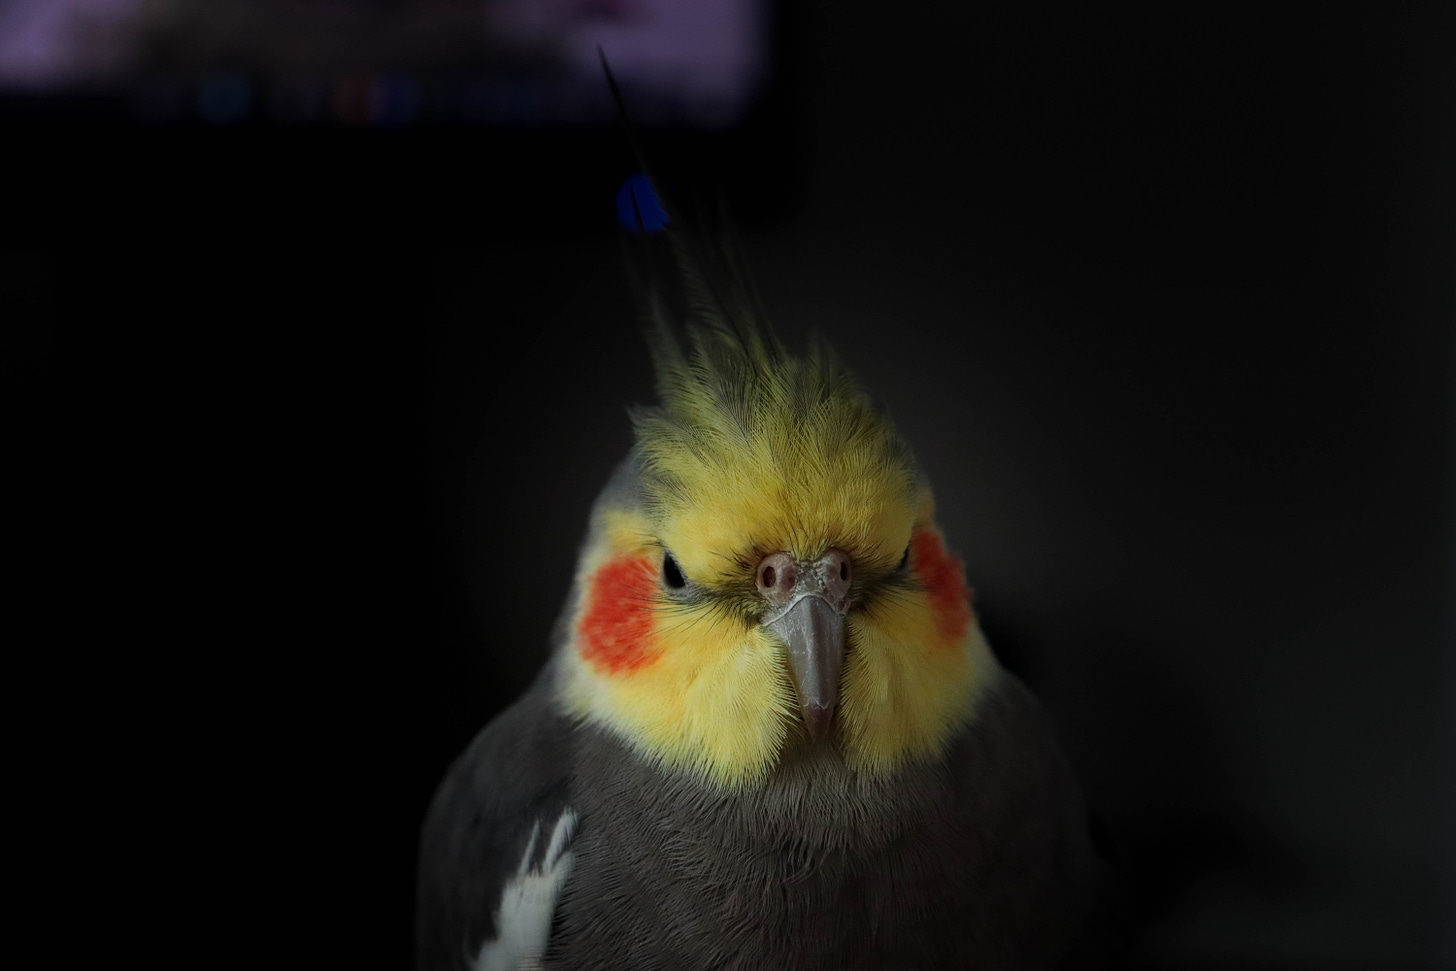 An adorably grumpy looking grey cockatiel with orange cheeks and a yellow face